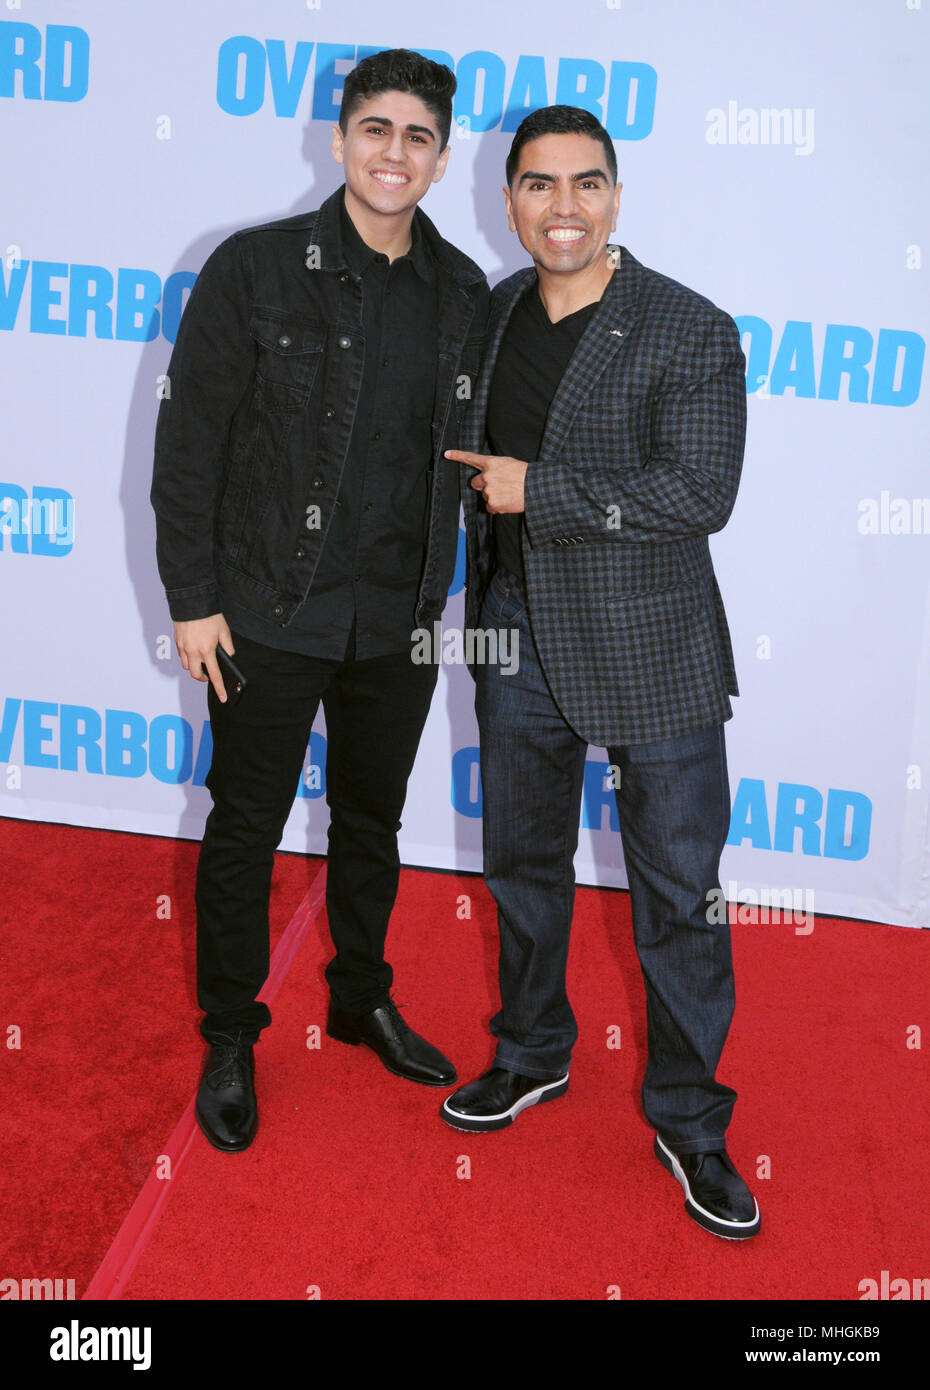 Los Angeles, USA. 30th April, 2018. Radio personality Eddie Piolin Sotelo  (R) and his son (L) attend the premiere of Lionsgate and Pantelion Film's  'Overboard' at Regency Village Theatre on April 30,